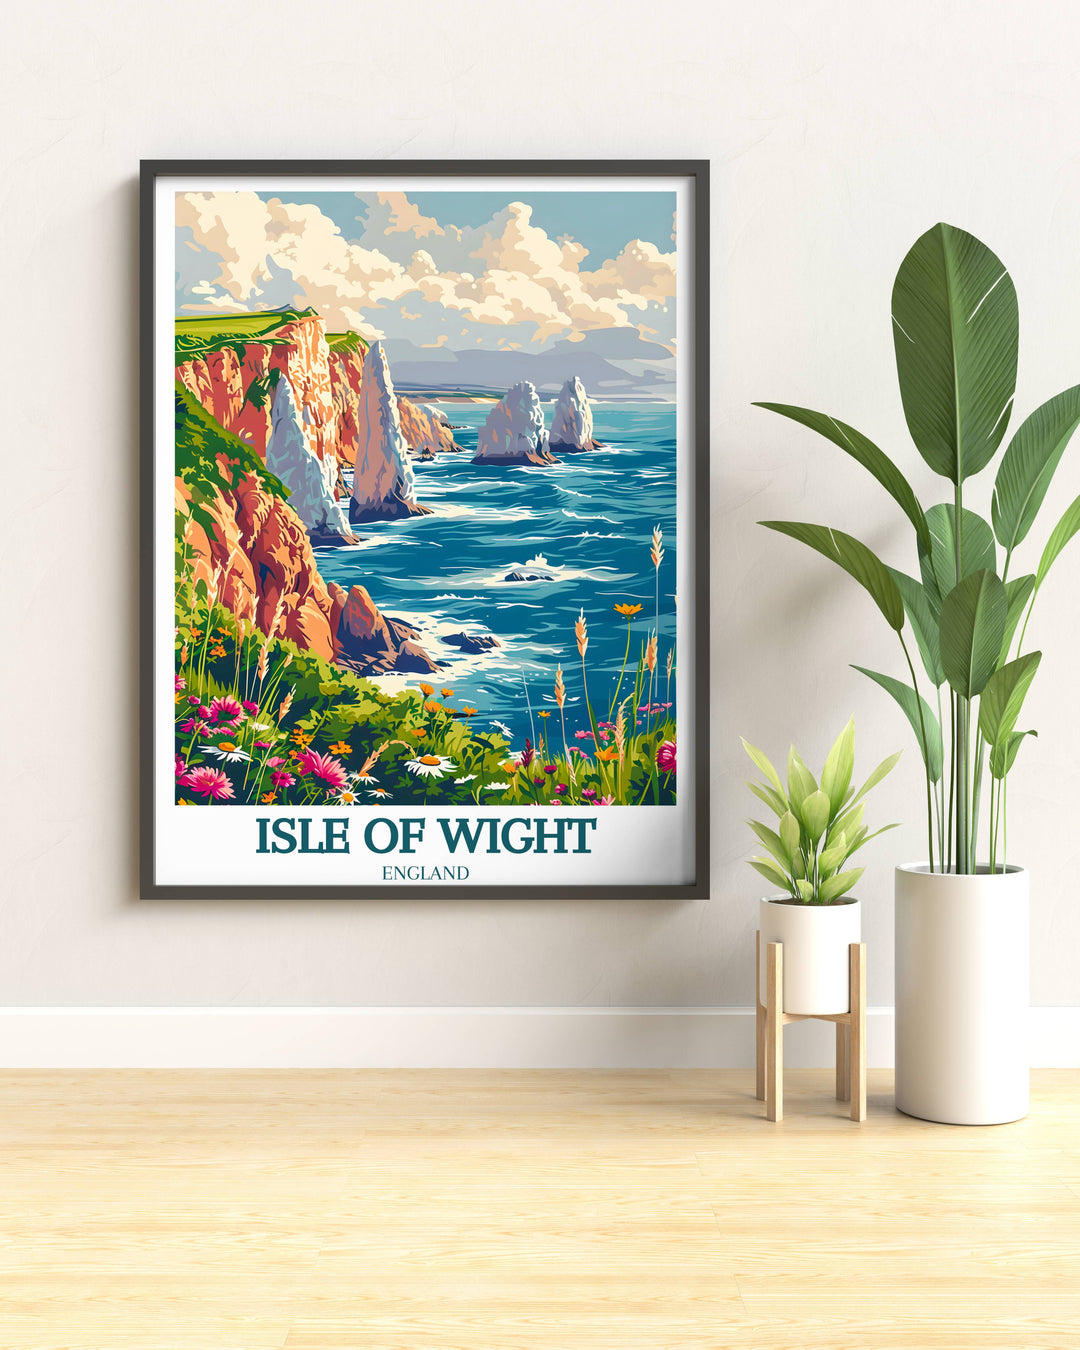 A serene twilight scene at The Needles Lighthouse, depicted in soothing blues and purples, reflecting the peaceful end of day at the coast, suitable for a bedroom or relaxation space.